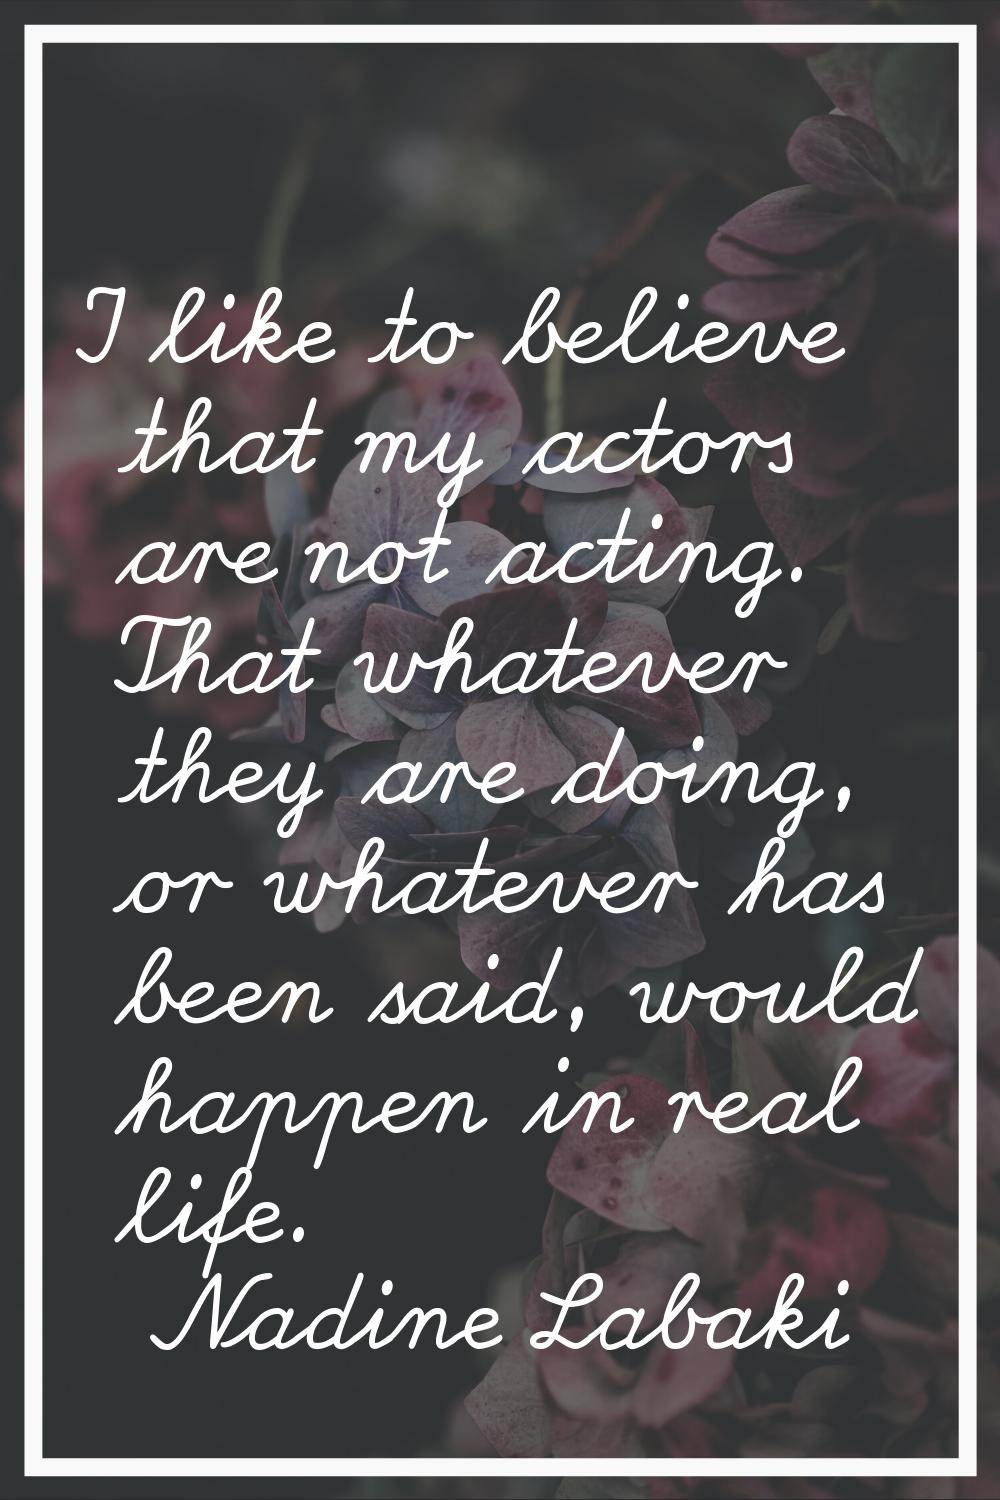 I like to believe that my actors are not acting. That whatever they are doing, or whatever has been